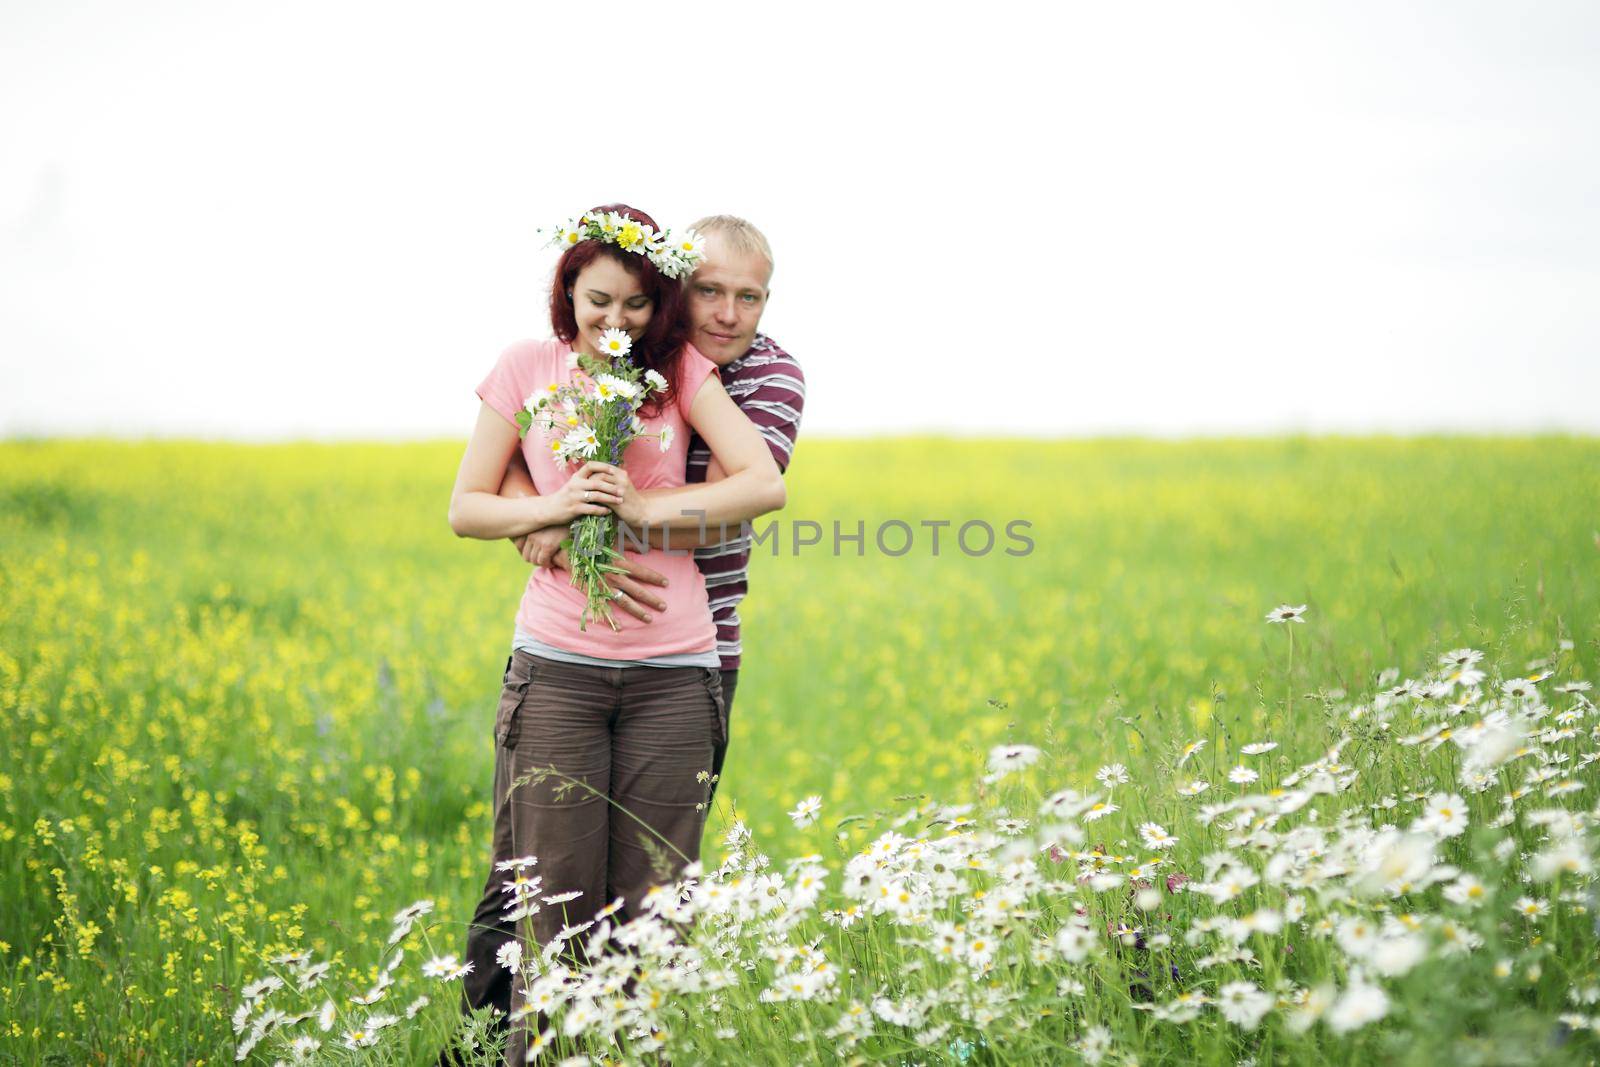 Enamored guy and girl in a green park with white daisies. 